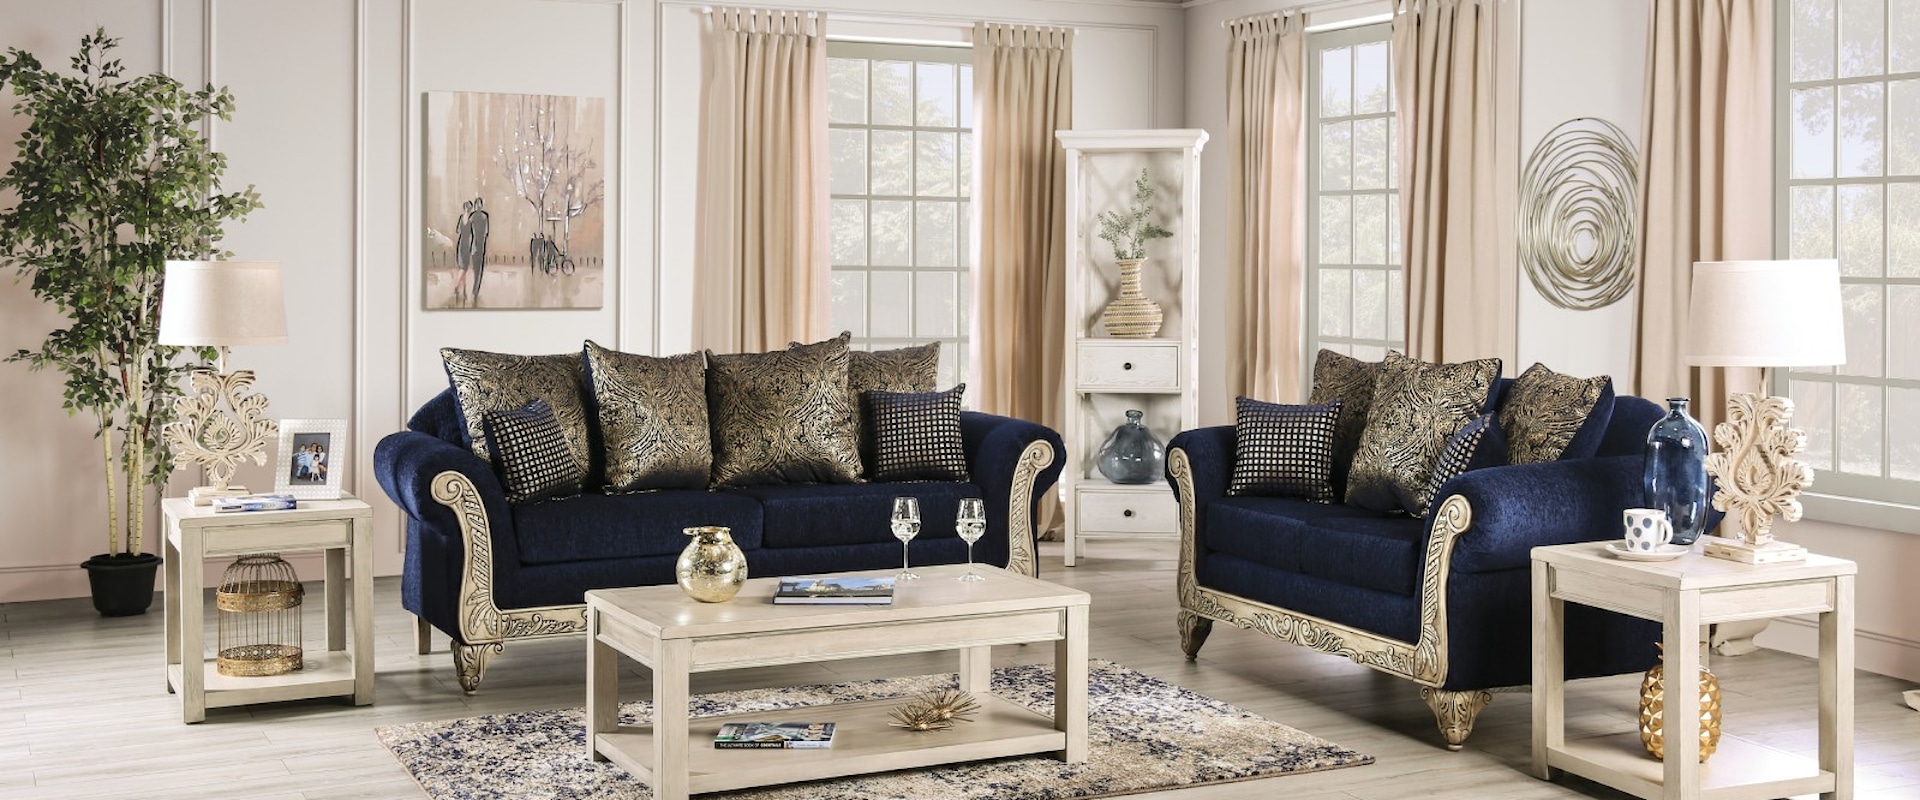 Traditional Sofa and Loveseat Set with Intricately Wood-Carved Trim